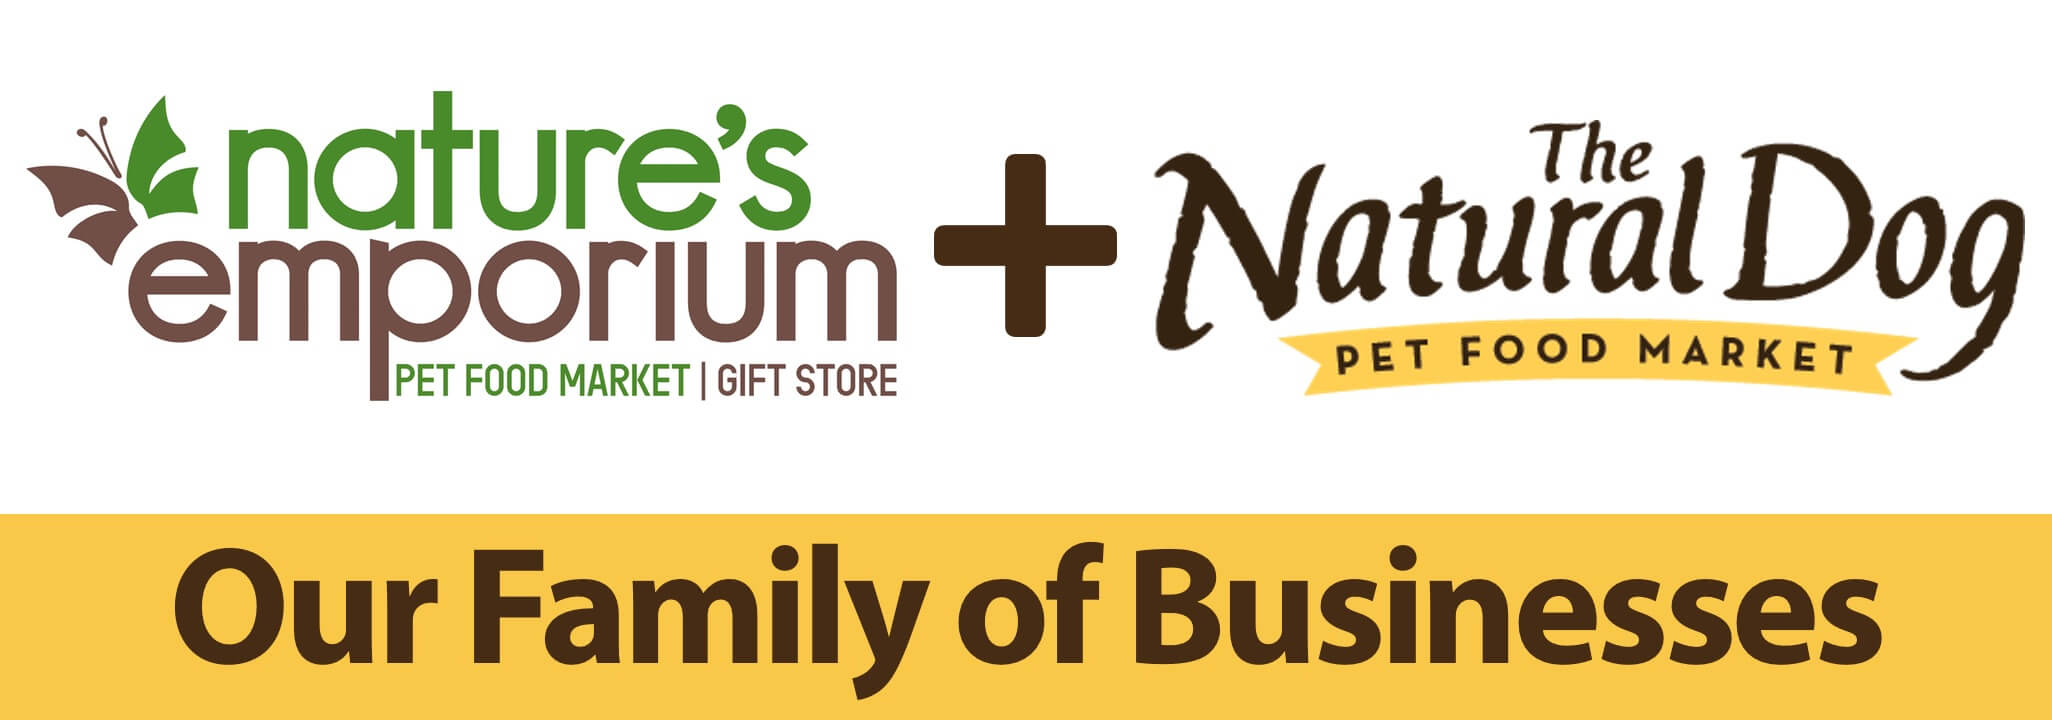 Nature's Emporium + The Natural Dog Our Family of Businesses